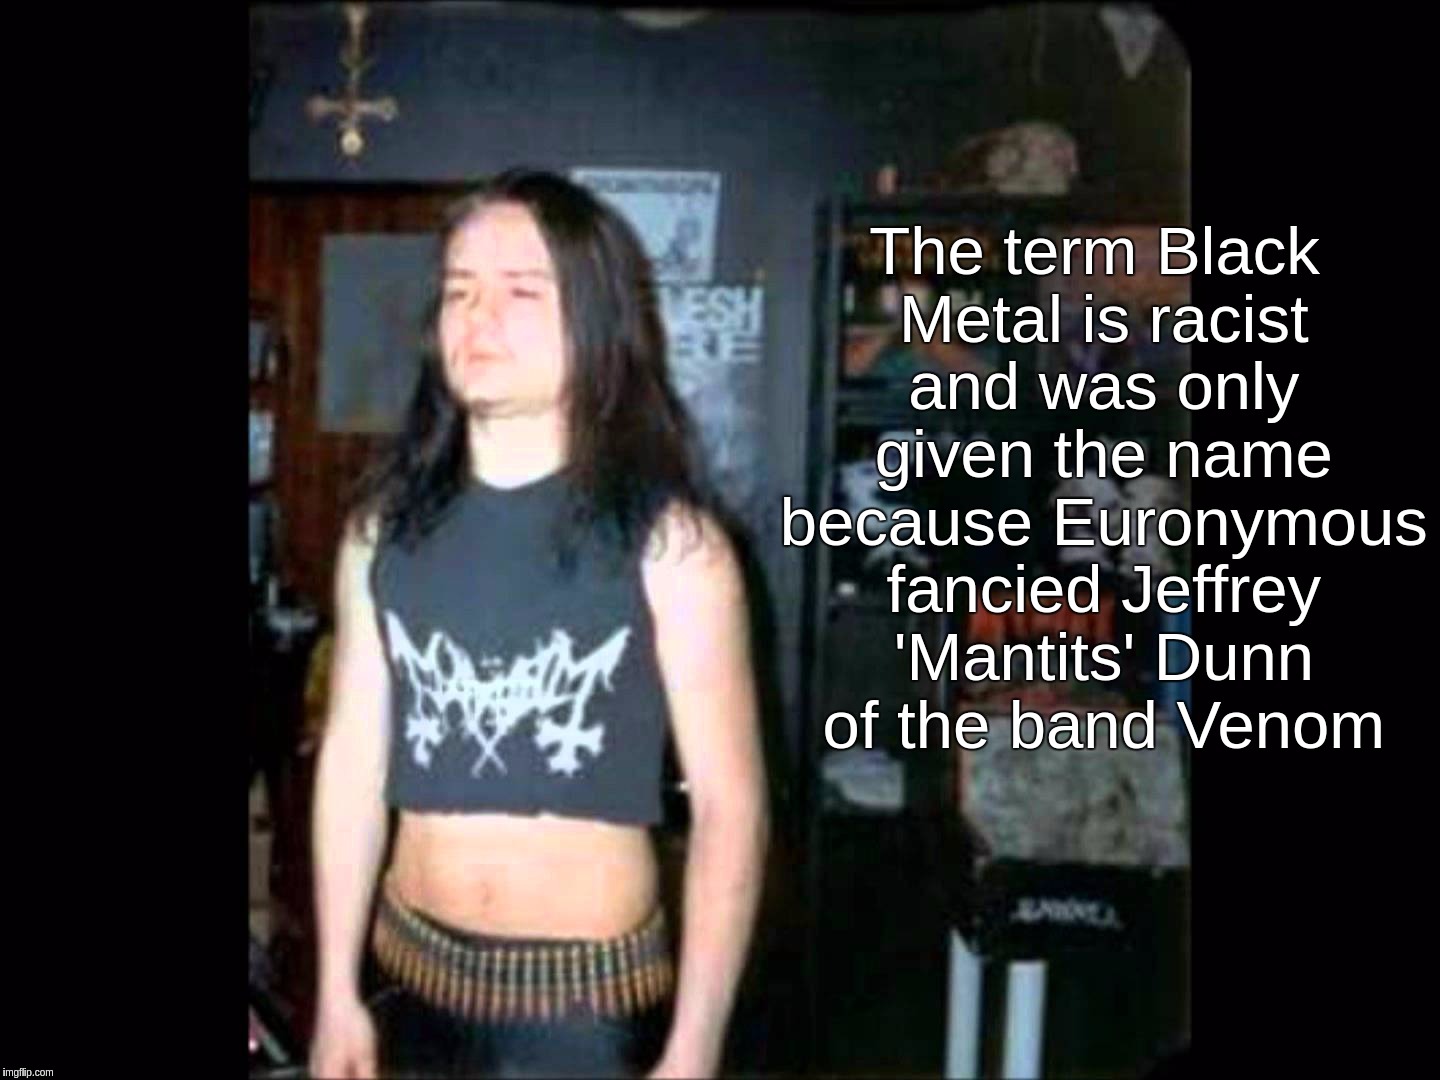 Gay Euronymous In A Girly Top Promoting Racist Black Metal | The term Black Metal is racist and was only given the name because Euronymous fancied Jeffrey 'Mantits' Dunn of the band Venom | image tagged in gay,euronymous,girly,racist,black,metal | made w/ Imgflip meme maker